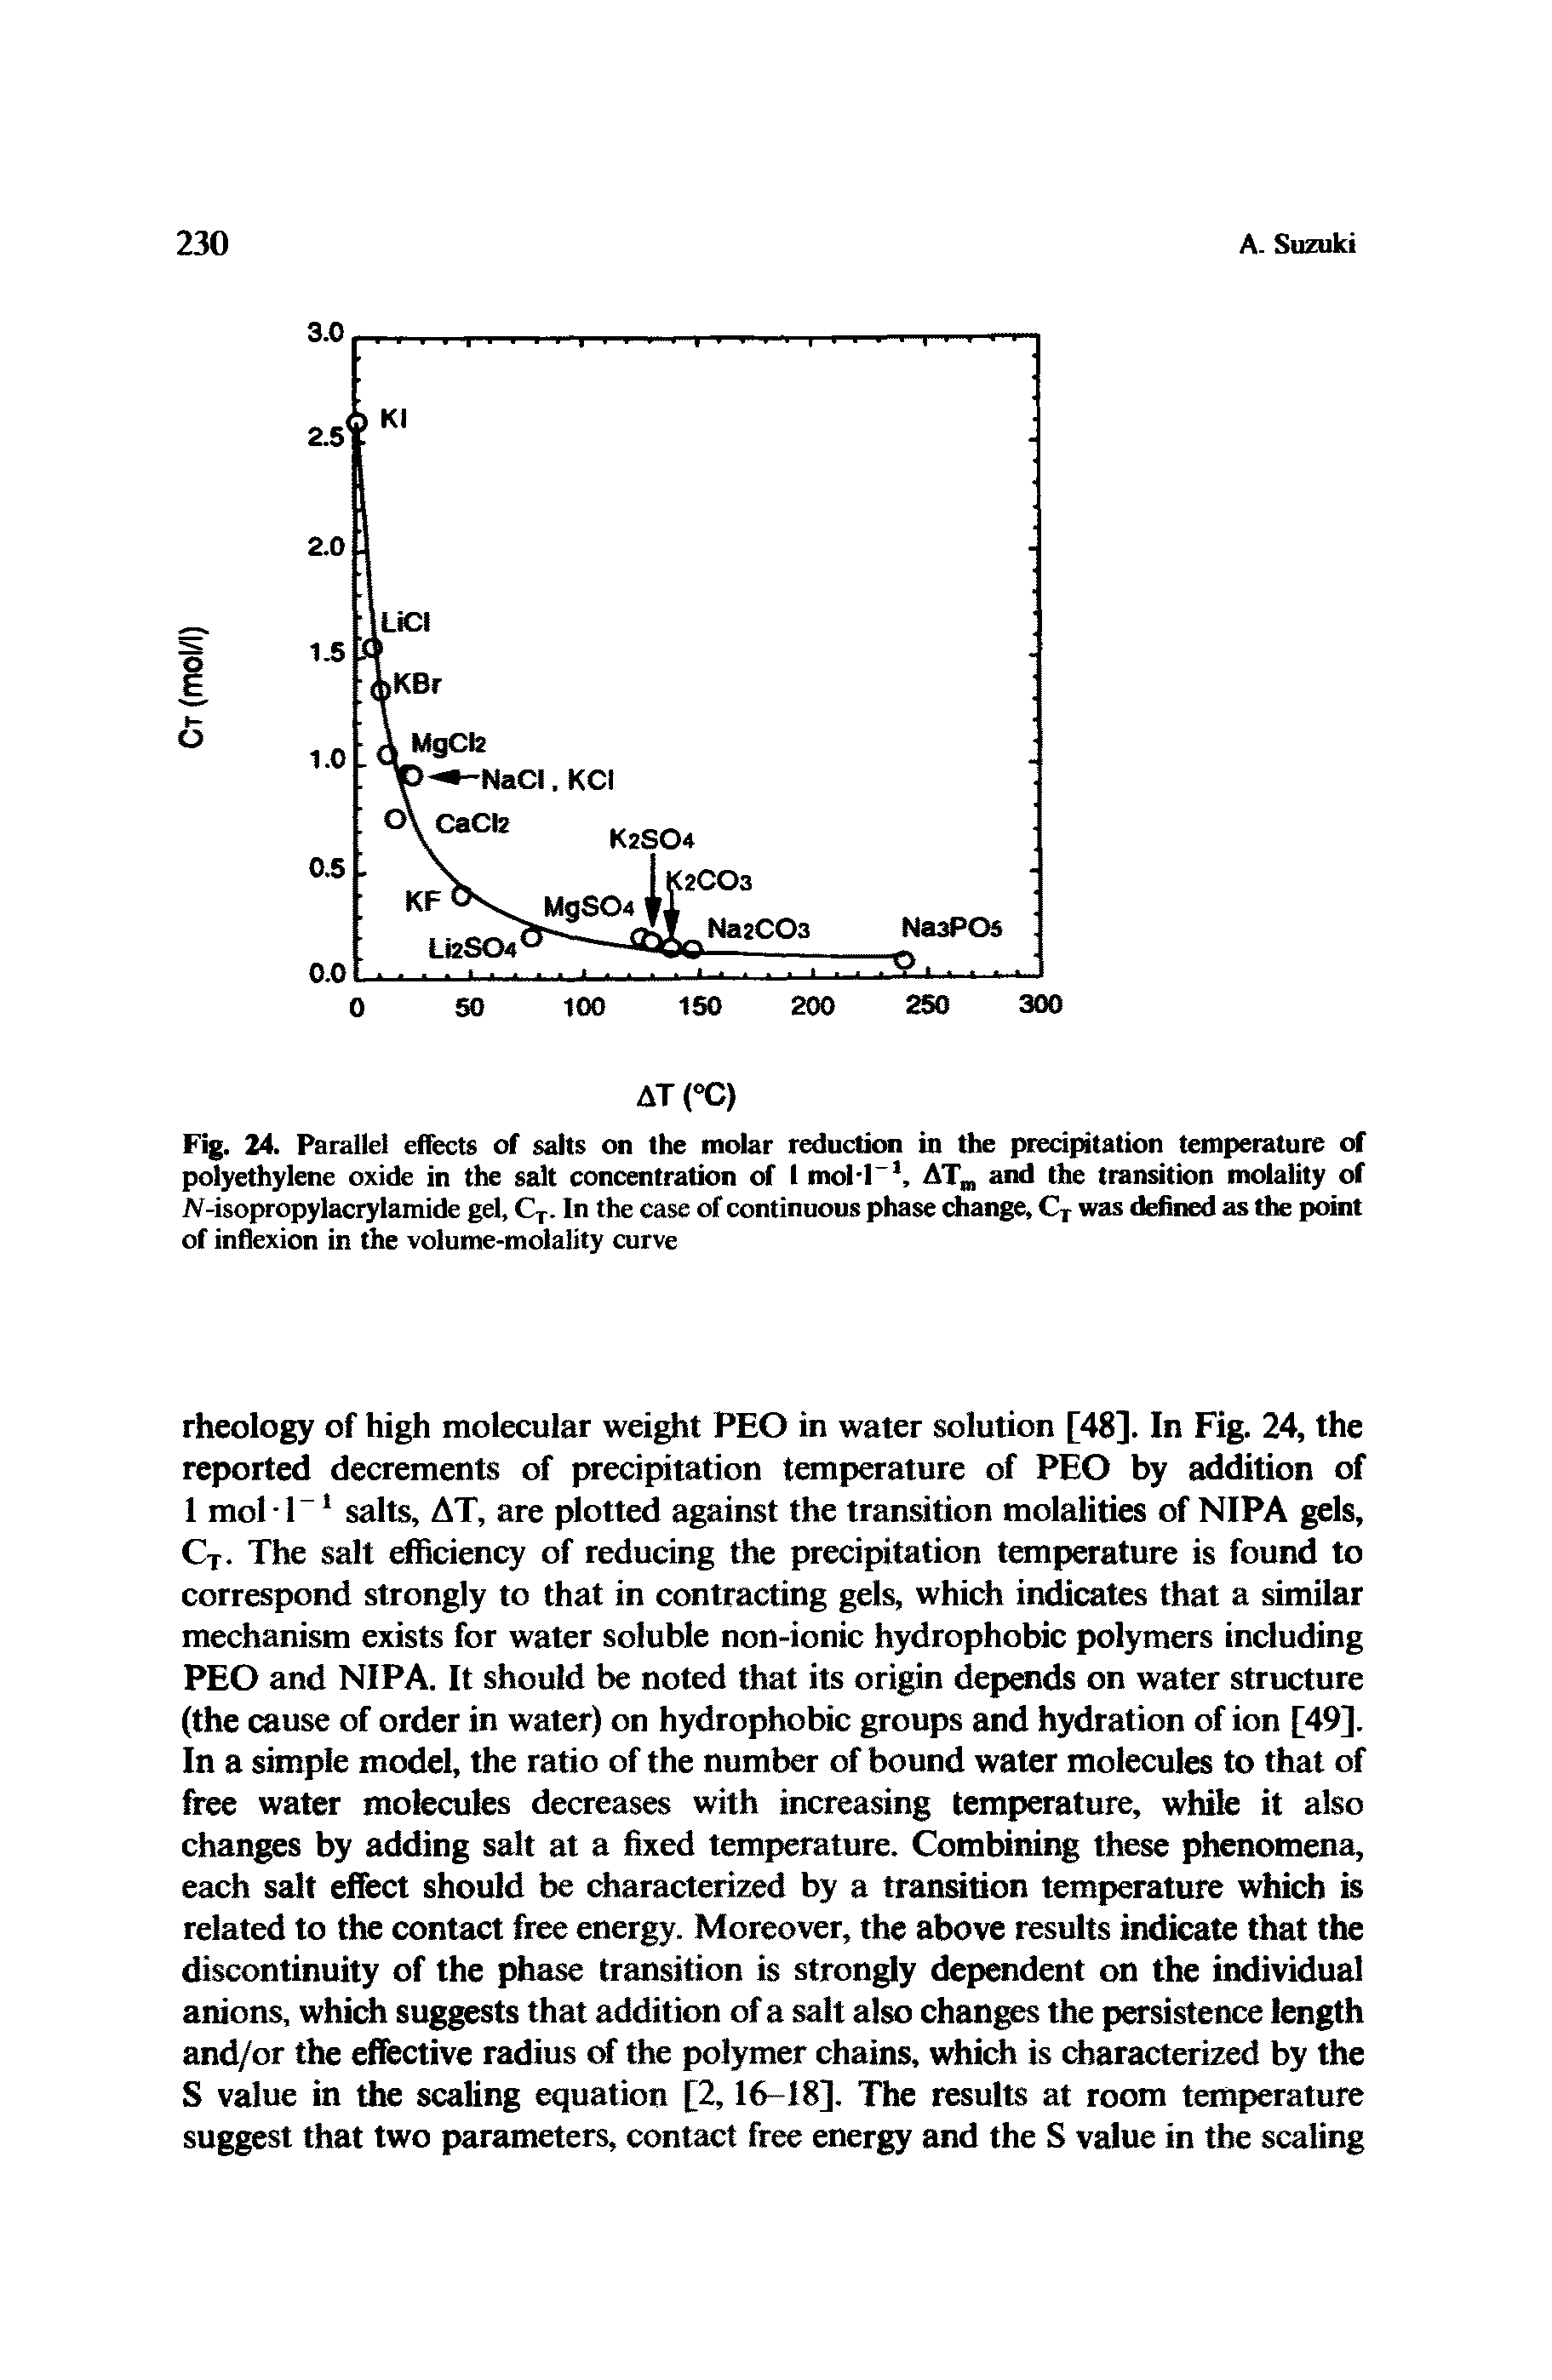 Fig. 24. Parallel effects of salts on the molar reduction in the precipitation temperature of polyethylene oxide in the salt concentration of I mol-1-1, ATm and the transition molality of AMsopropylacrylamide gel, CT. In the case of continuous phase change, Cr was defined as the point of inflexion in the volume-molality curve...